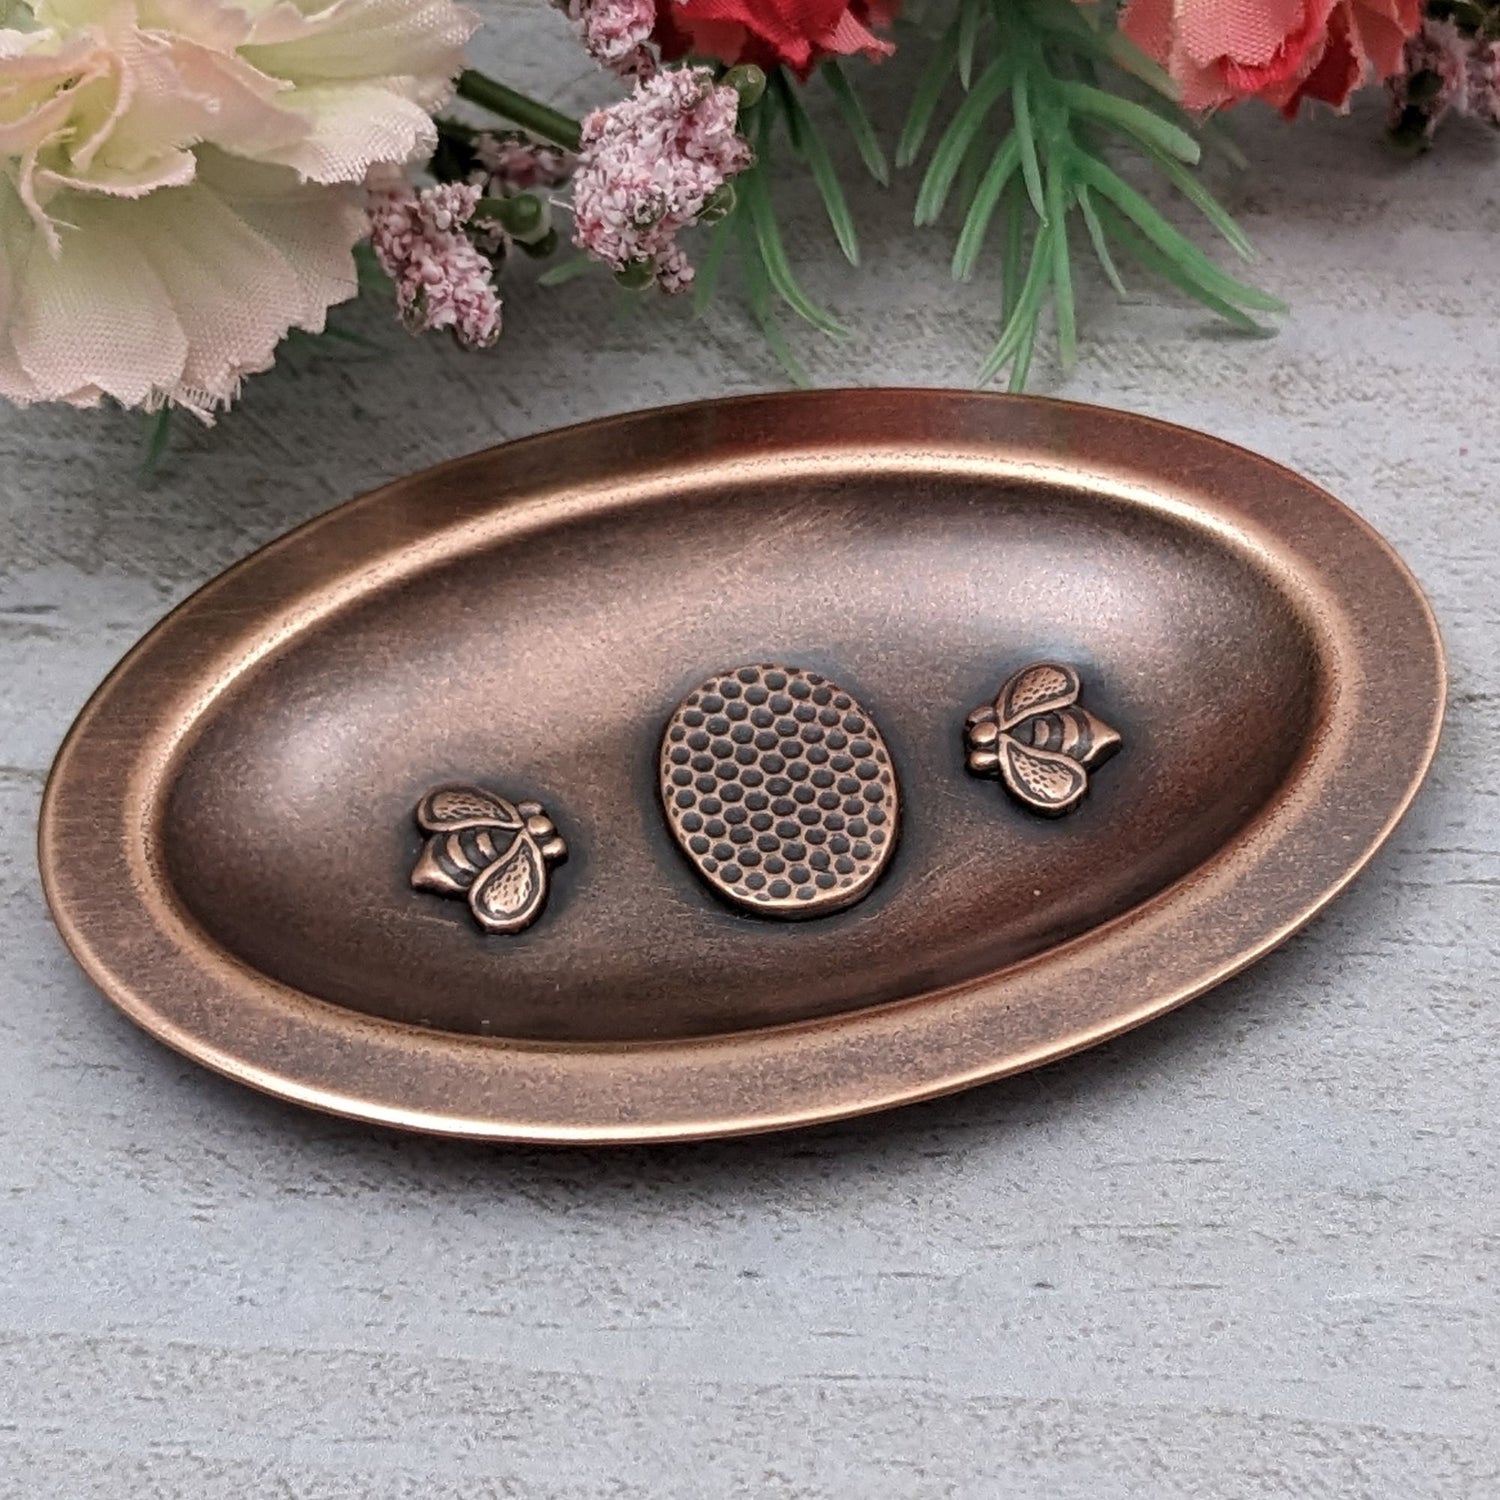 Oval copper ring dish. In the middle is a three dimensional oval honeycomb pattern. On either side of the honeycomb is a three dimensional bee. The dish has a small lip around the edge.